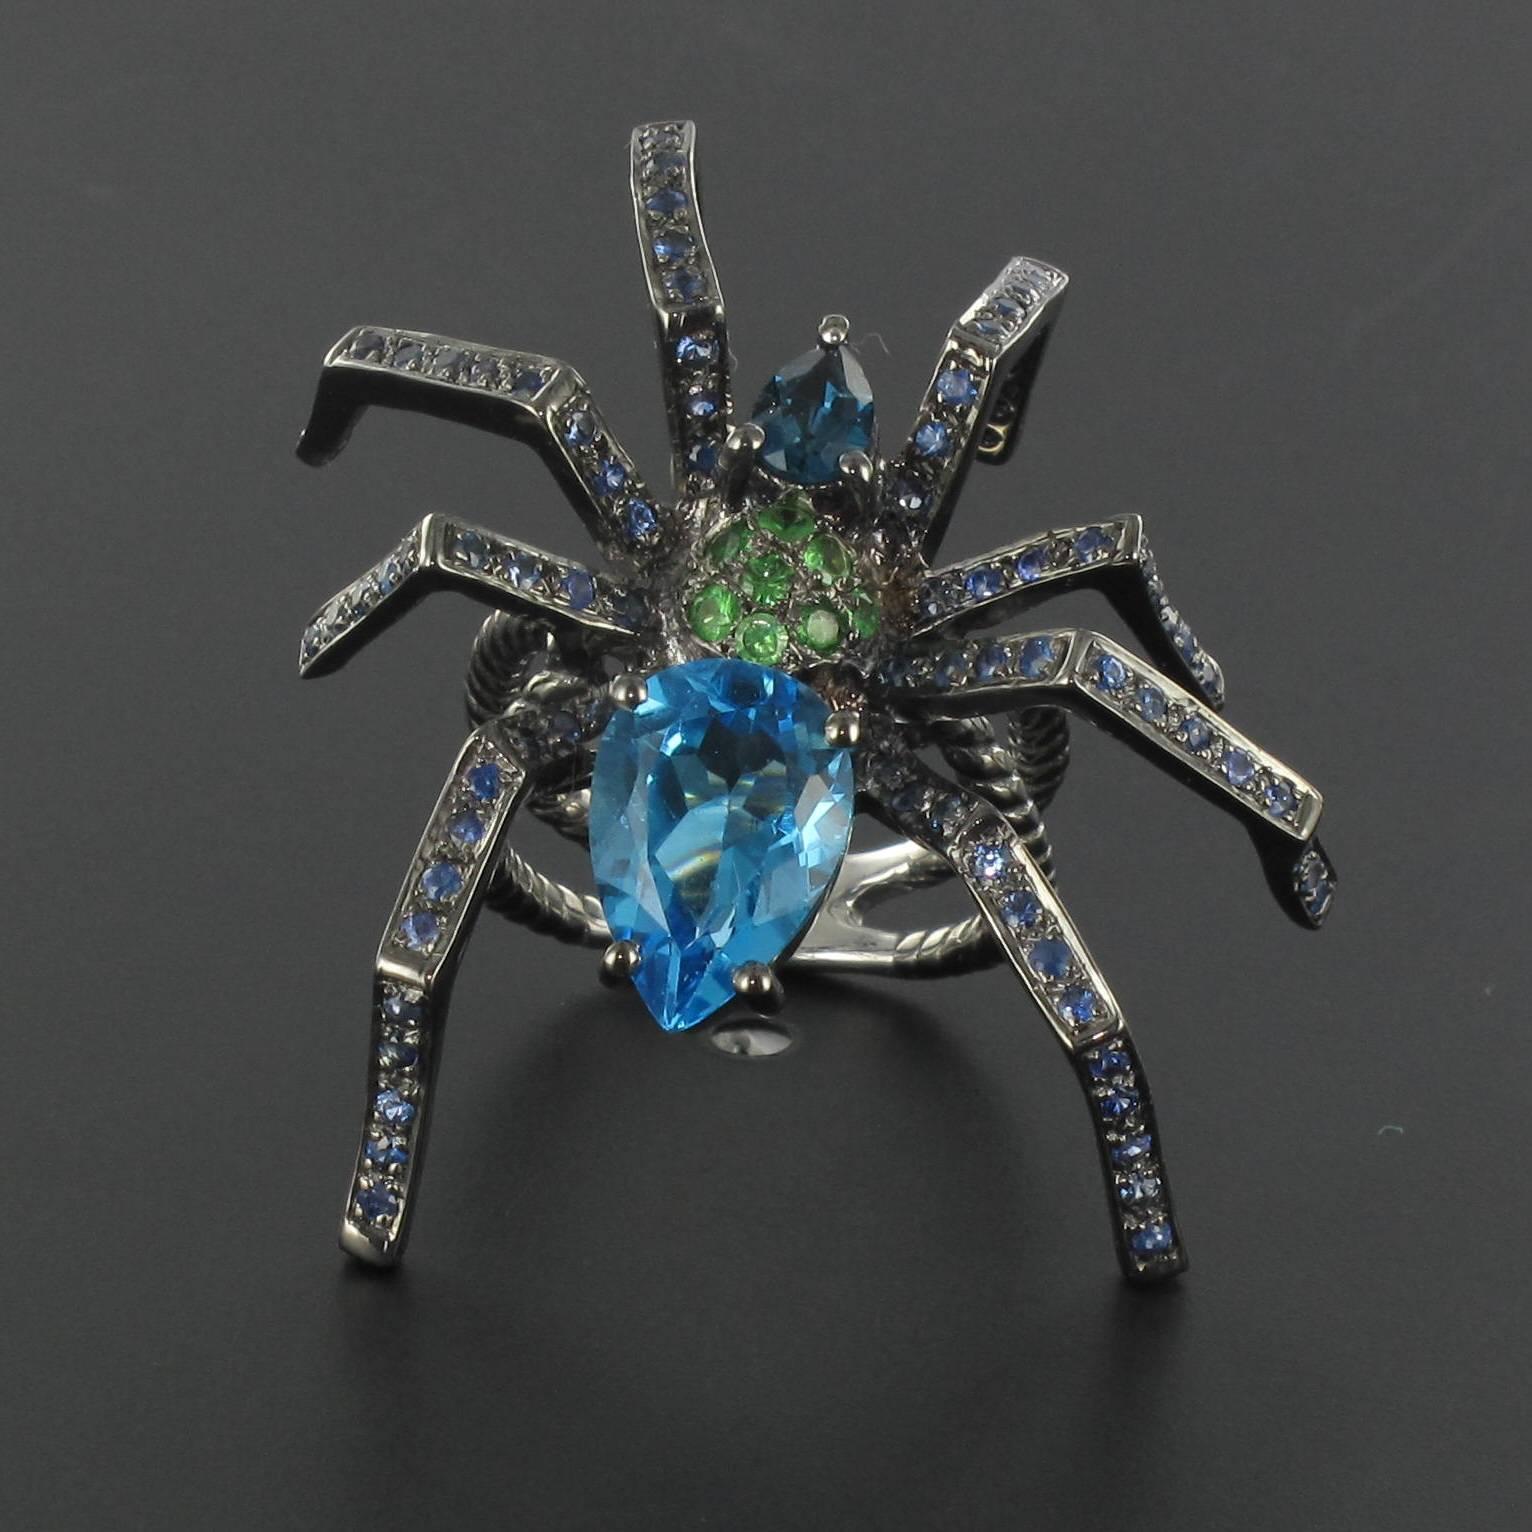 Silver Ring with black rhodium.

This incredible black silver ring is in the realistic form of a spider. The body of the spider is composed of 2 pear cut topazes with a pave of 9 round tsavorite green garnets. The legs are set with round